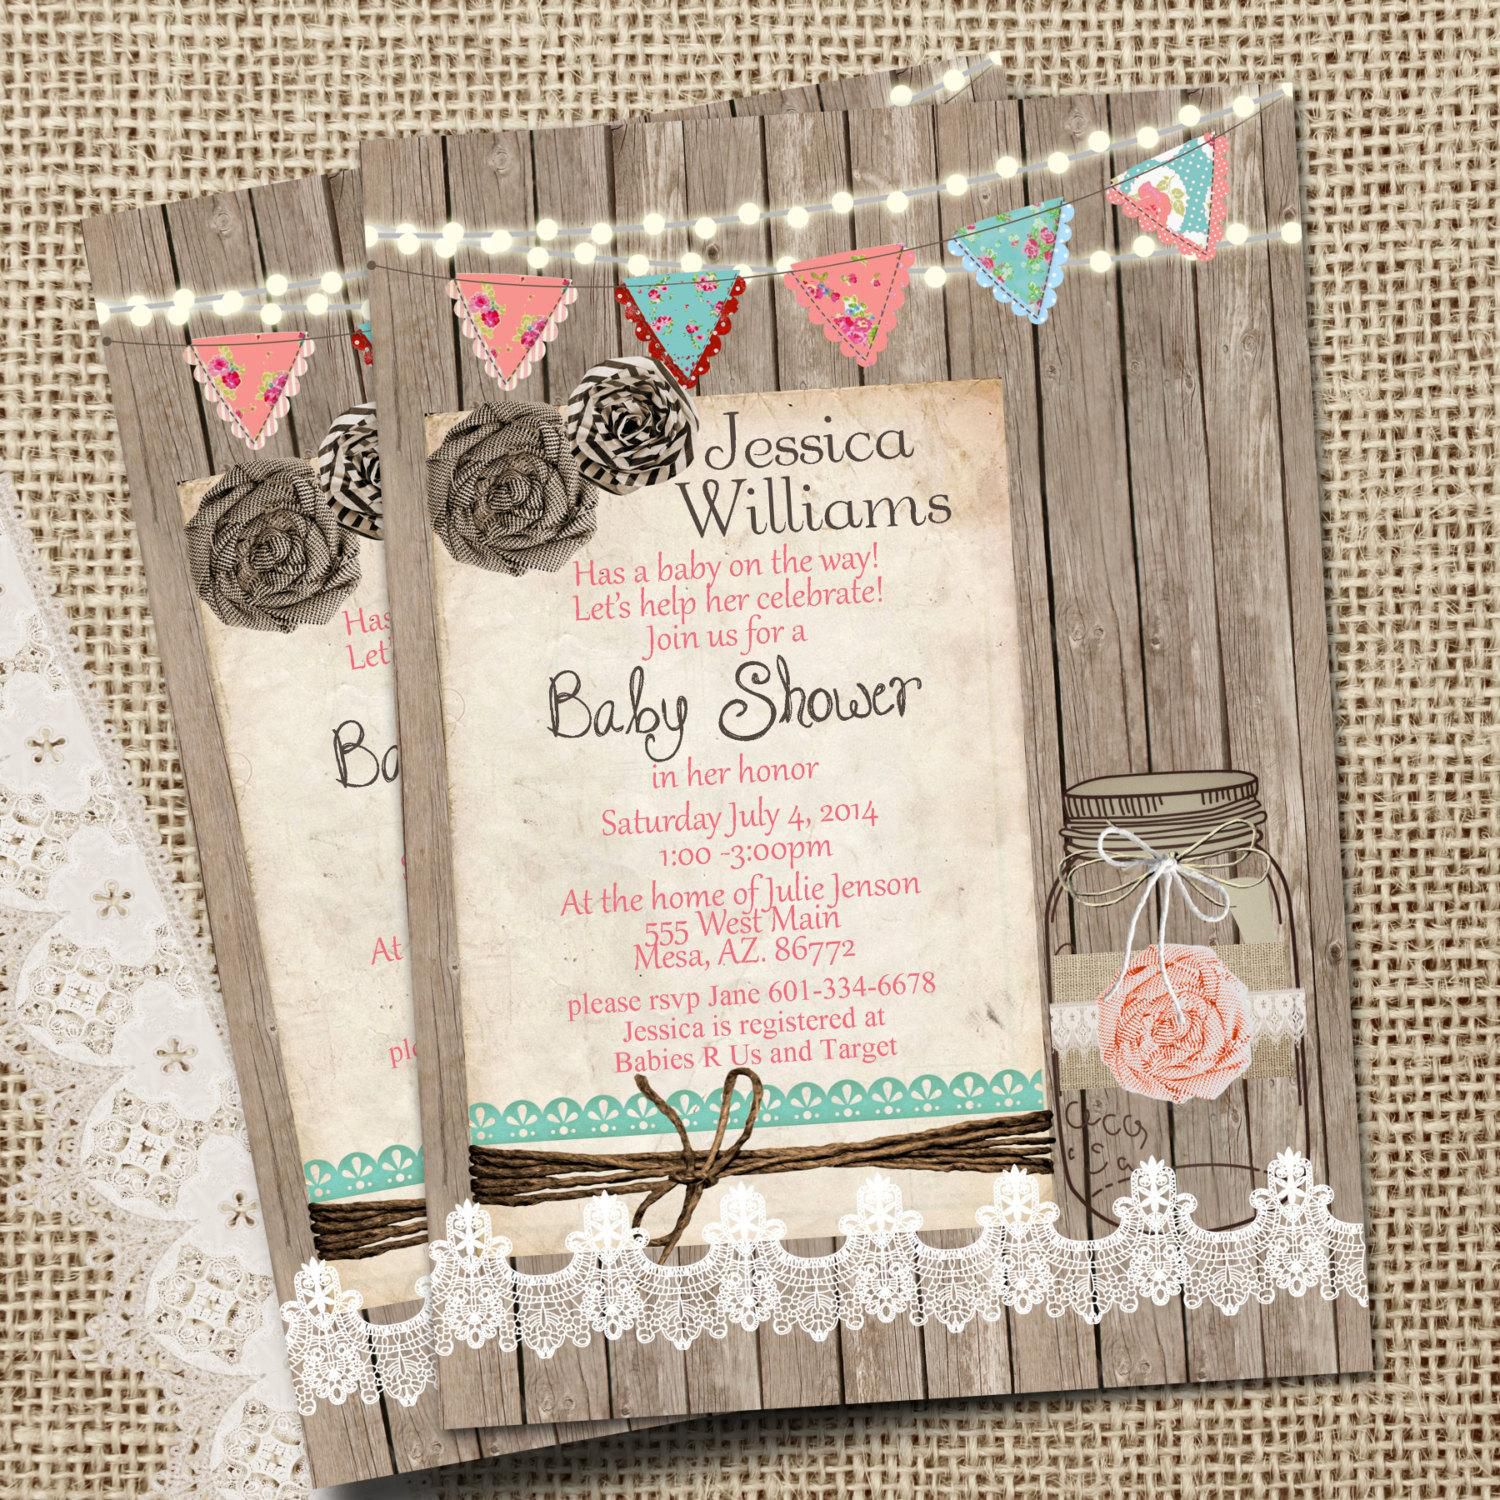 Full Size of Baby Shower:63+ Delightful Cheap Baby Shower Invitations Image Inspirations Cheap Baby Shower Invitations Arreglos Para Baby Shower Baby Shower Clip Art Baby Shower Food Ideas Baby Shower Ideas For Boys Nice Cheap Baby Shower Invitations 31 Wyllieforgovernor